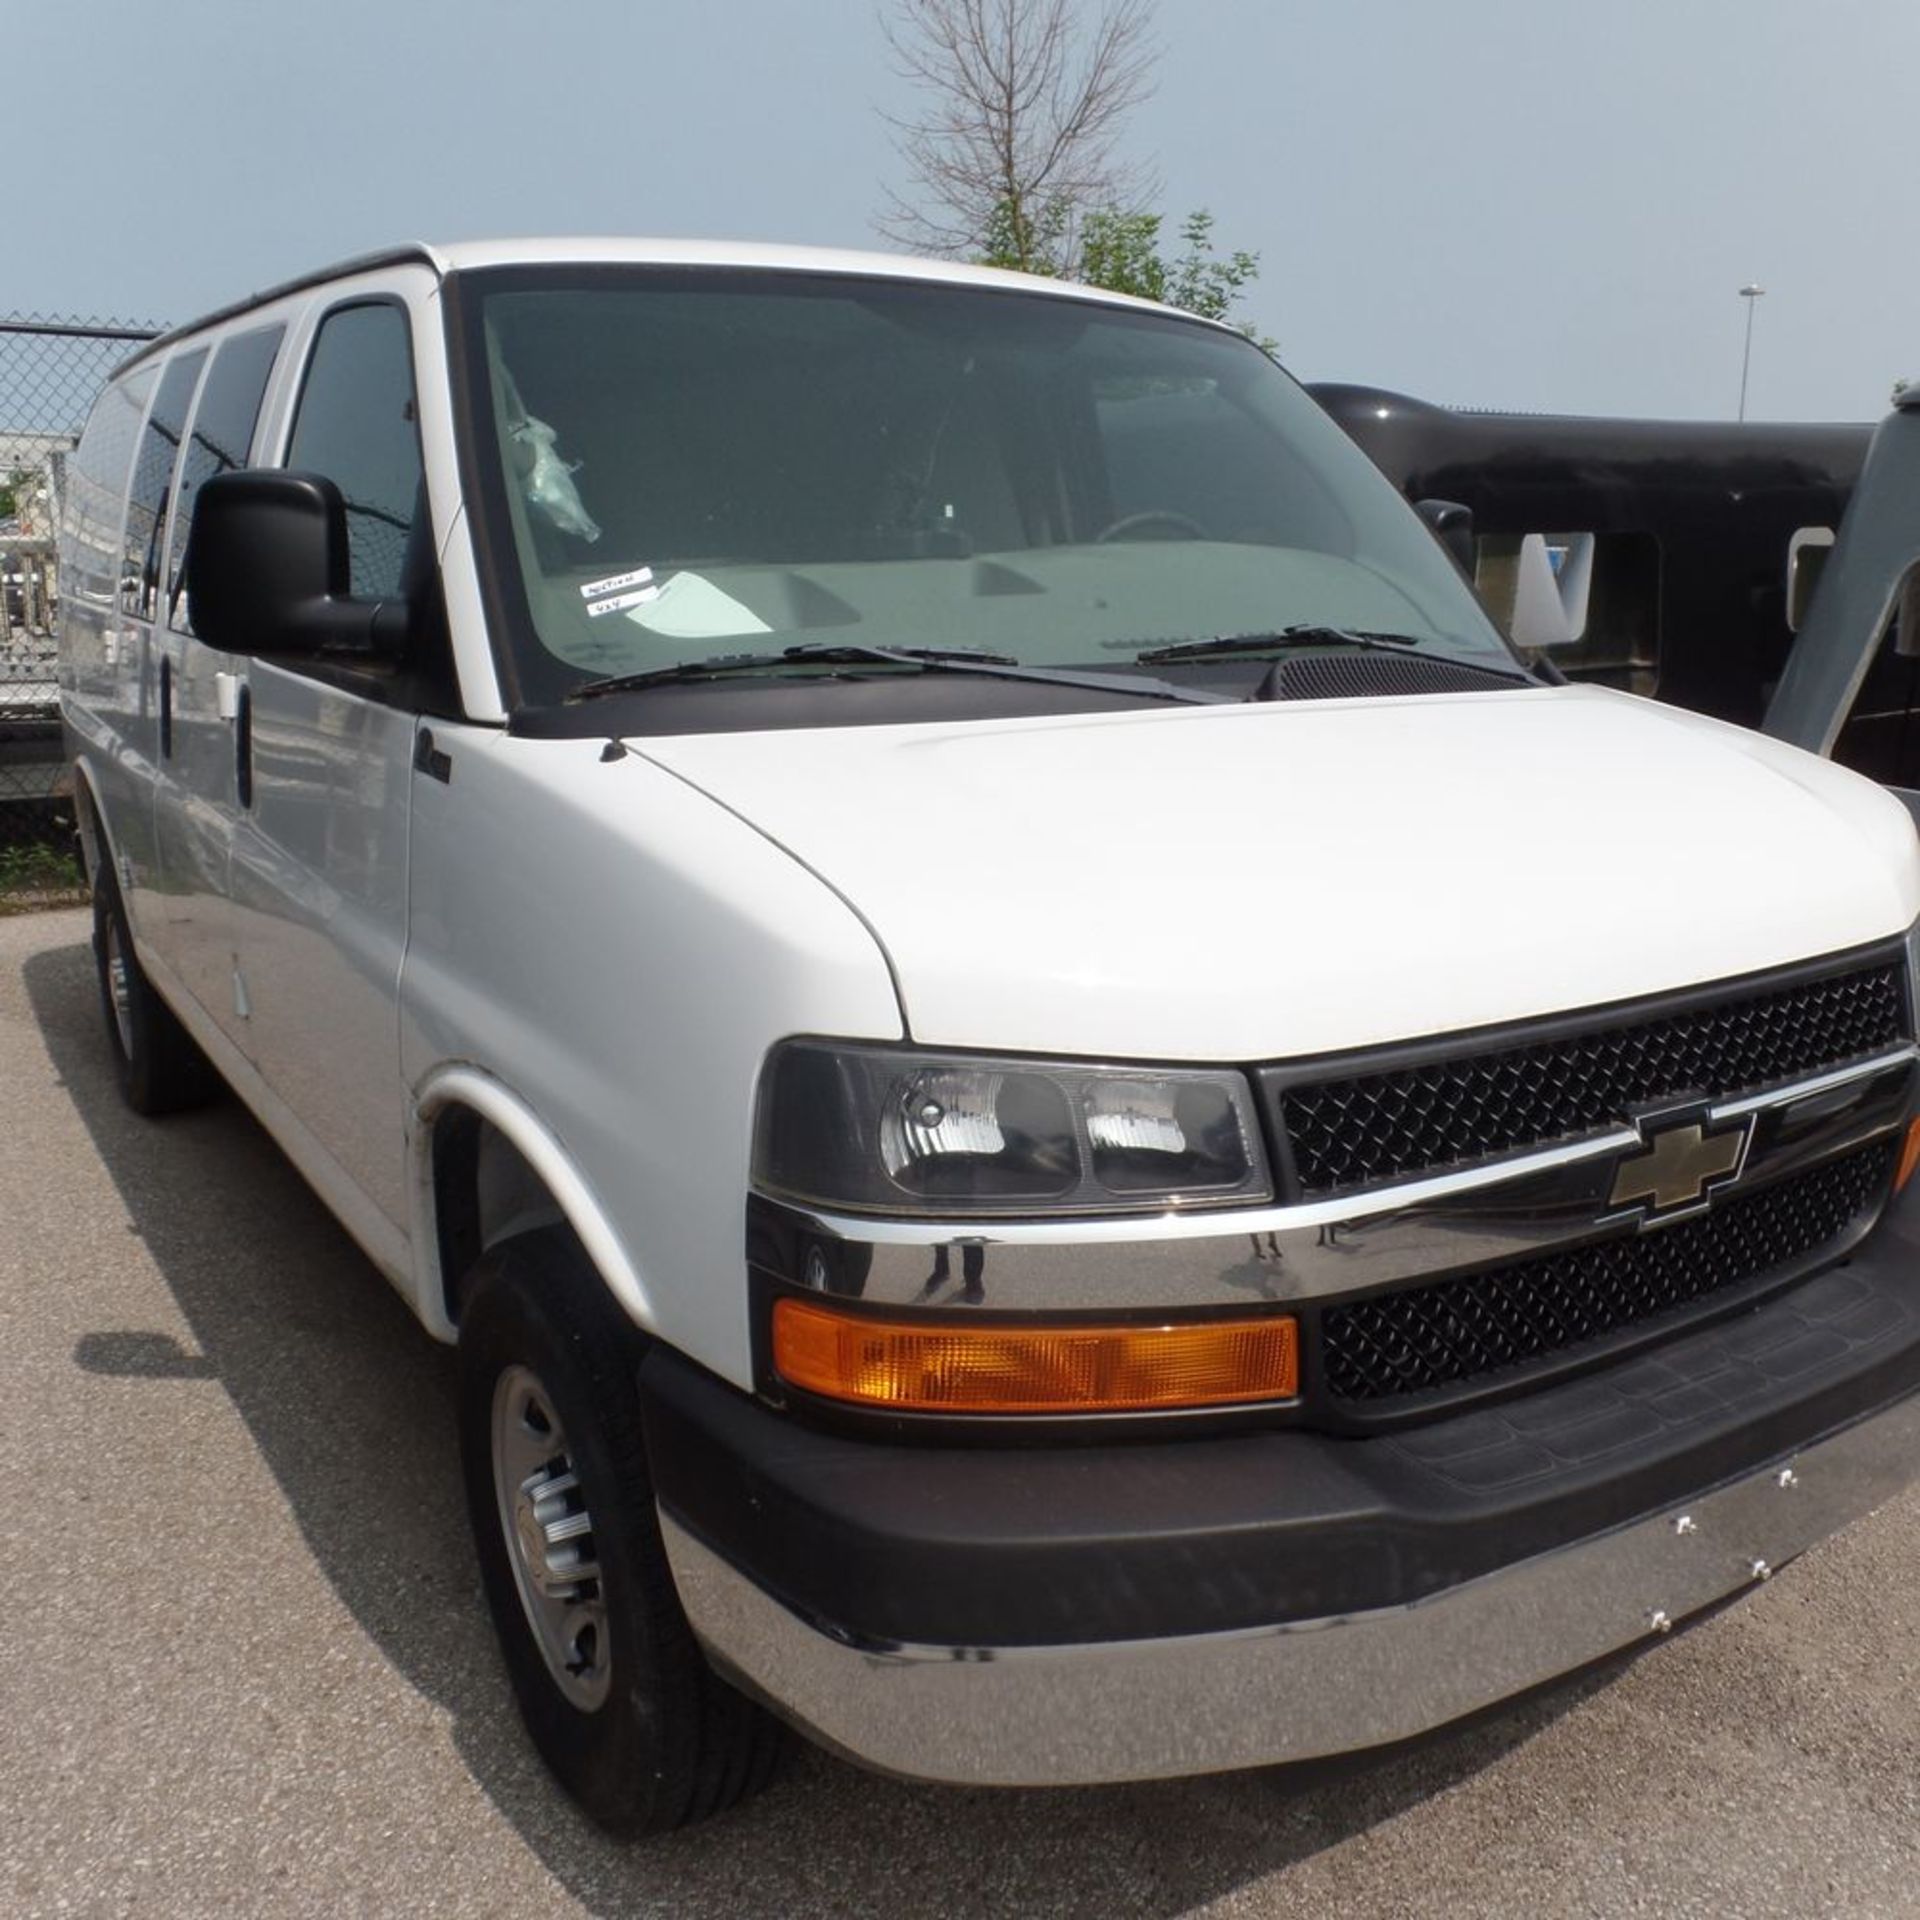 2013 Chev 4x4 Panel Van, Equipped with Quigley 4X4 drive system, VIN# 1GCWGFCA9D1181273 (As Is) - Image 2 of 9